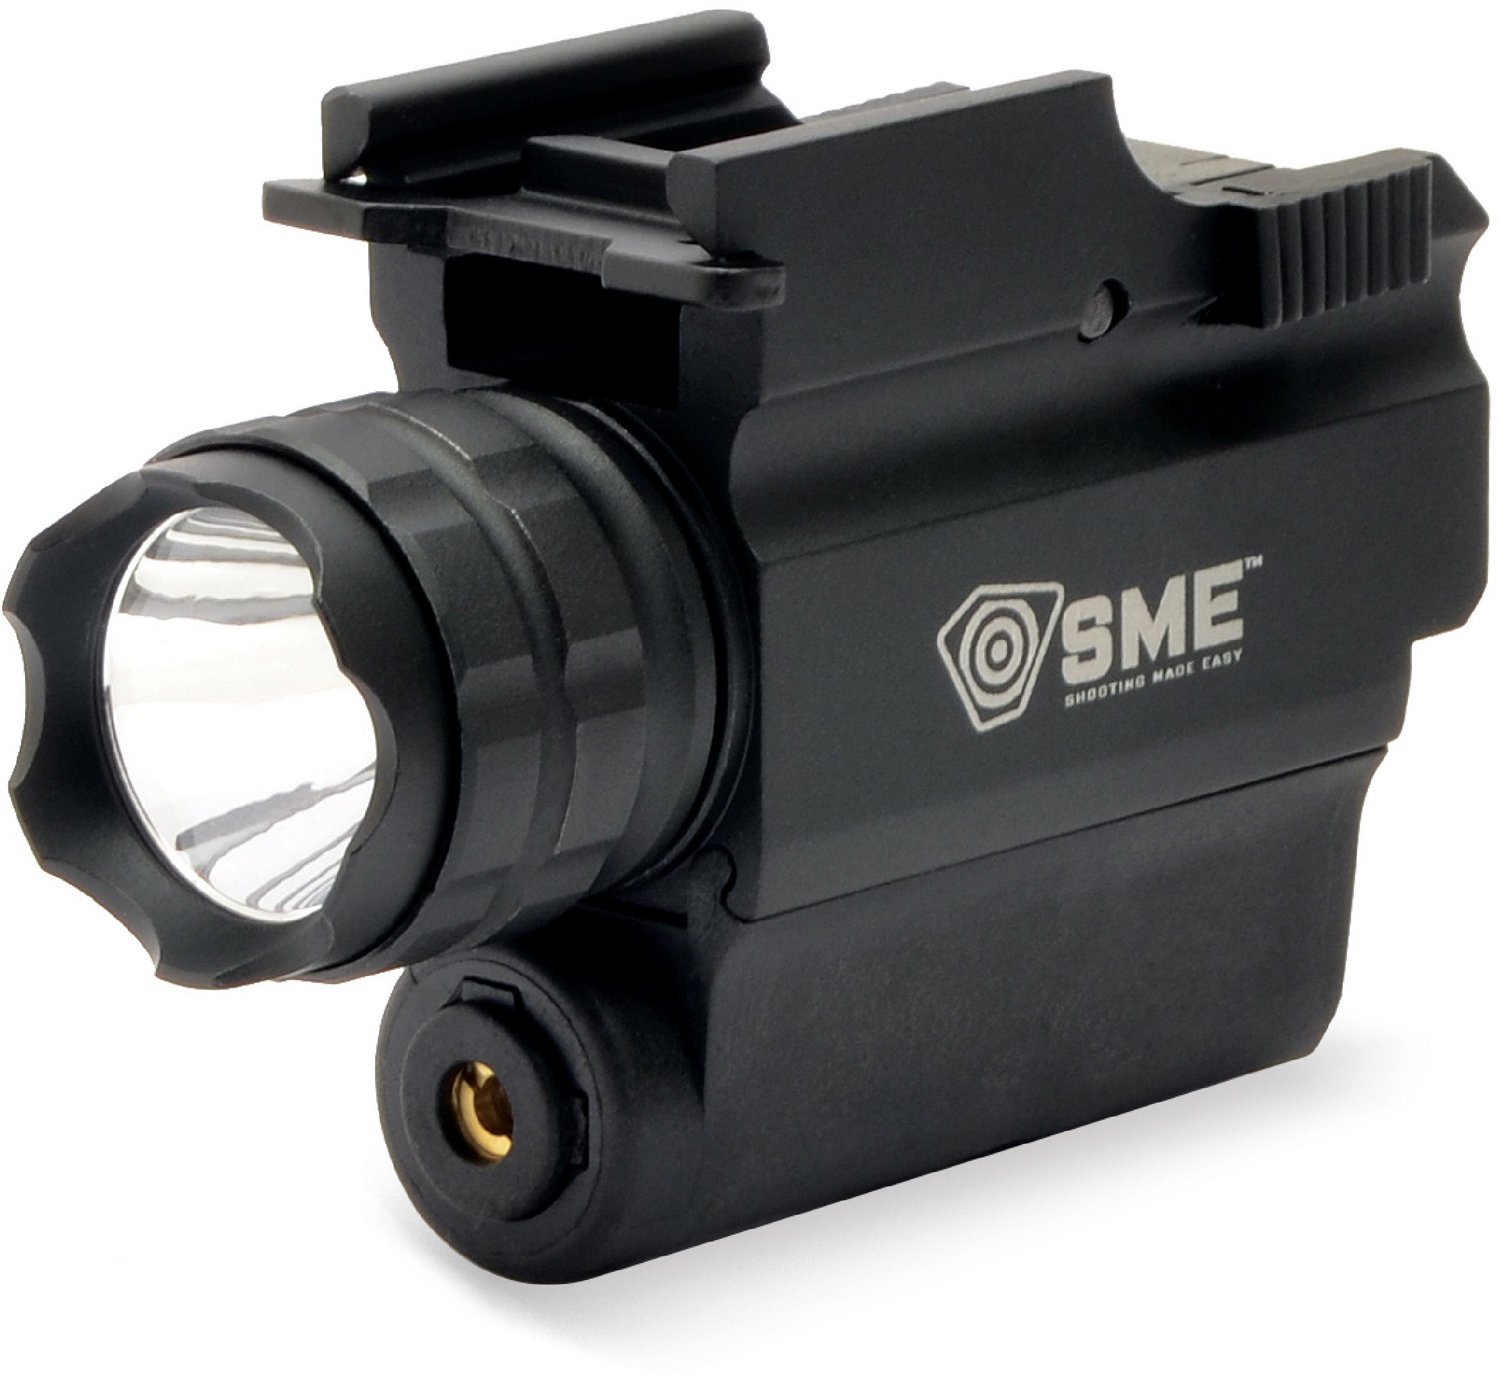 SME Compact Tactical Handgun LED Light and Laser Combo                                                                           - view number 1 selected